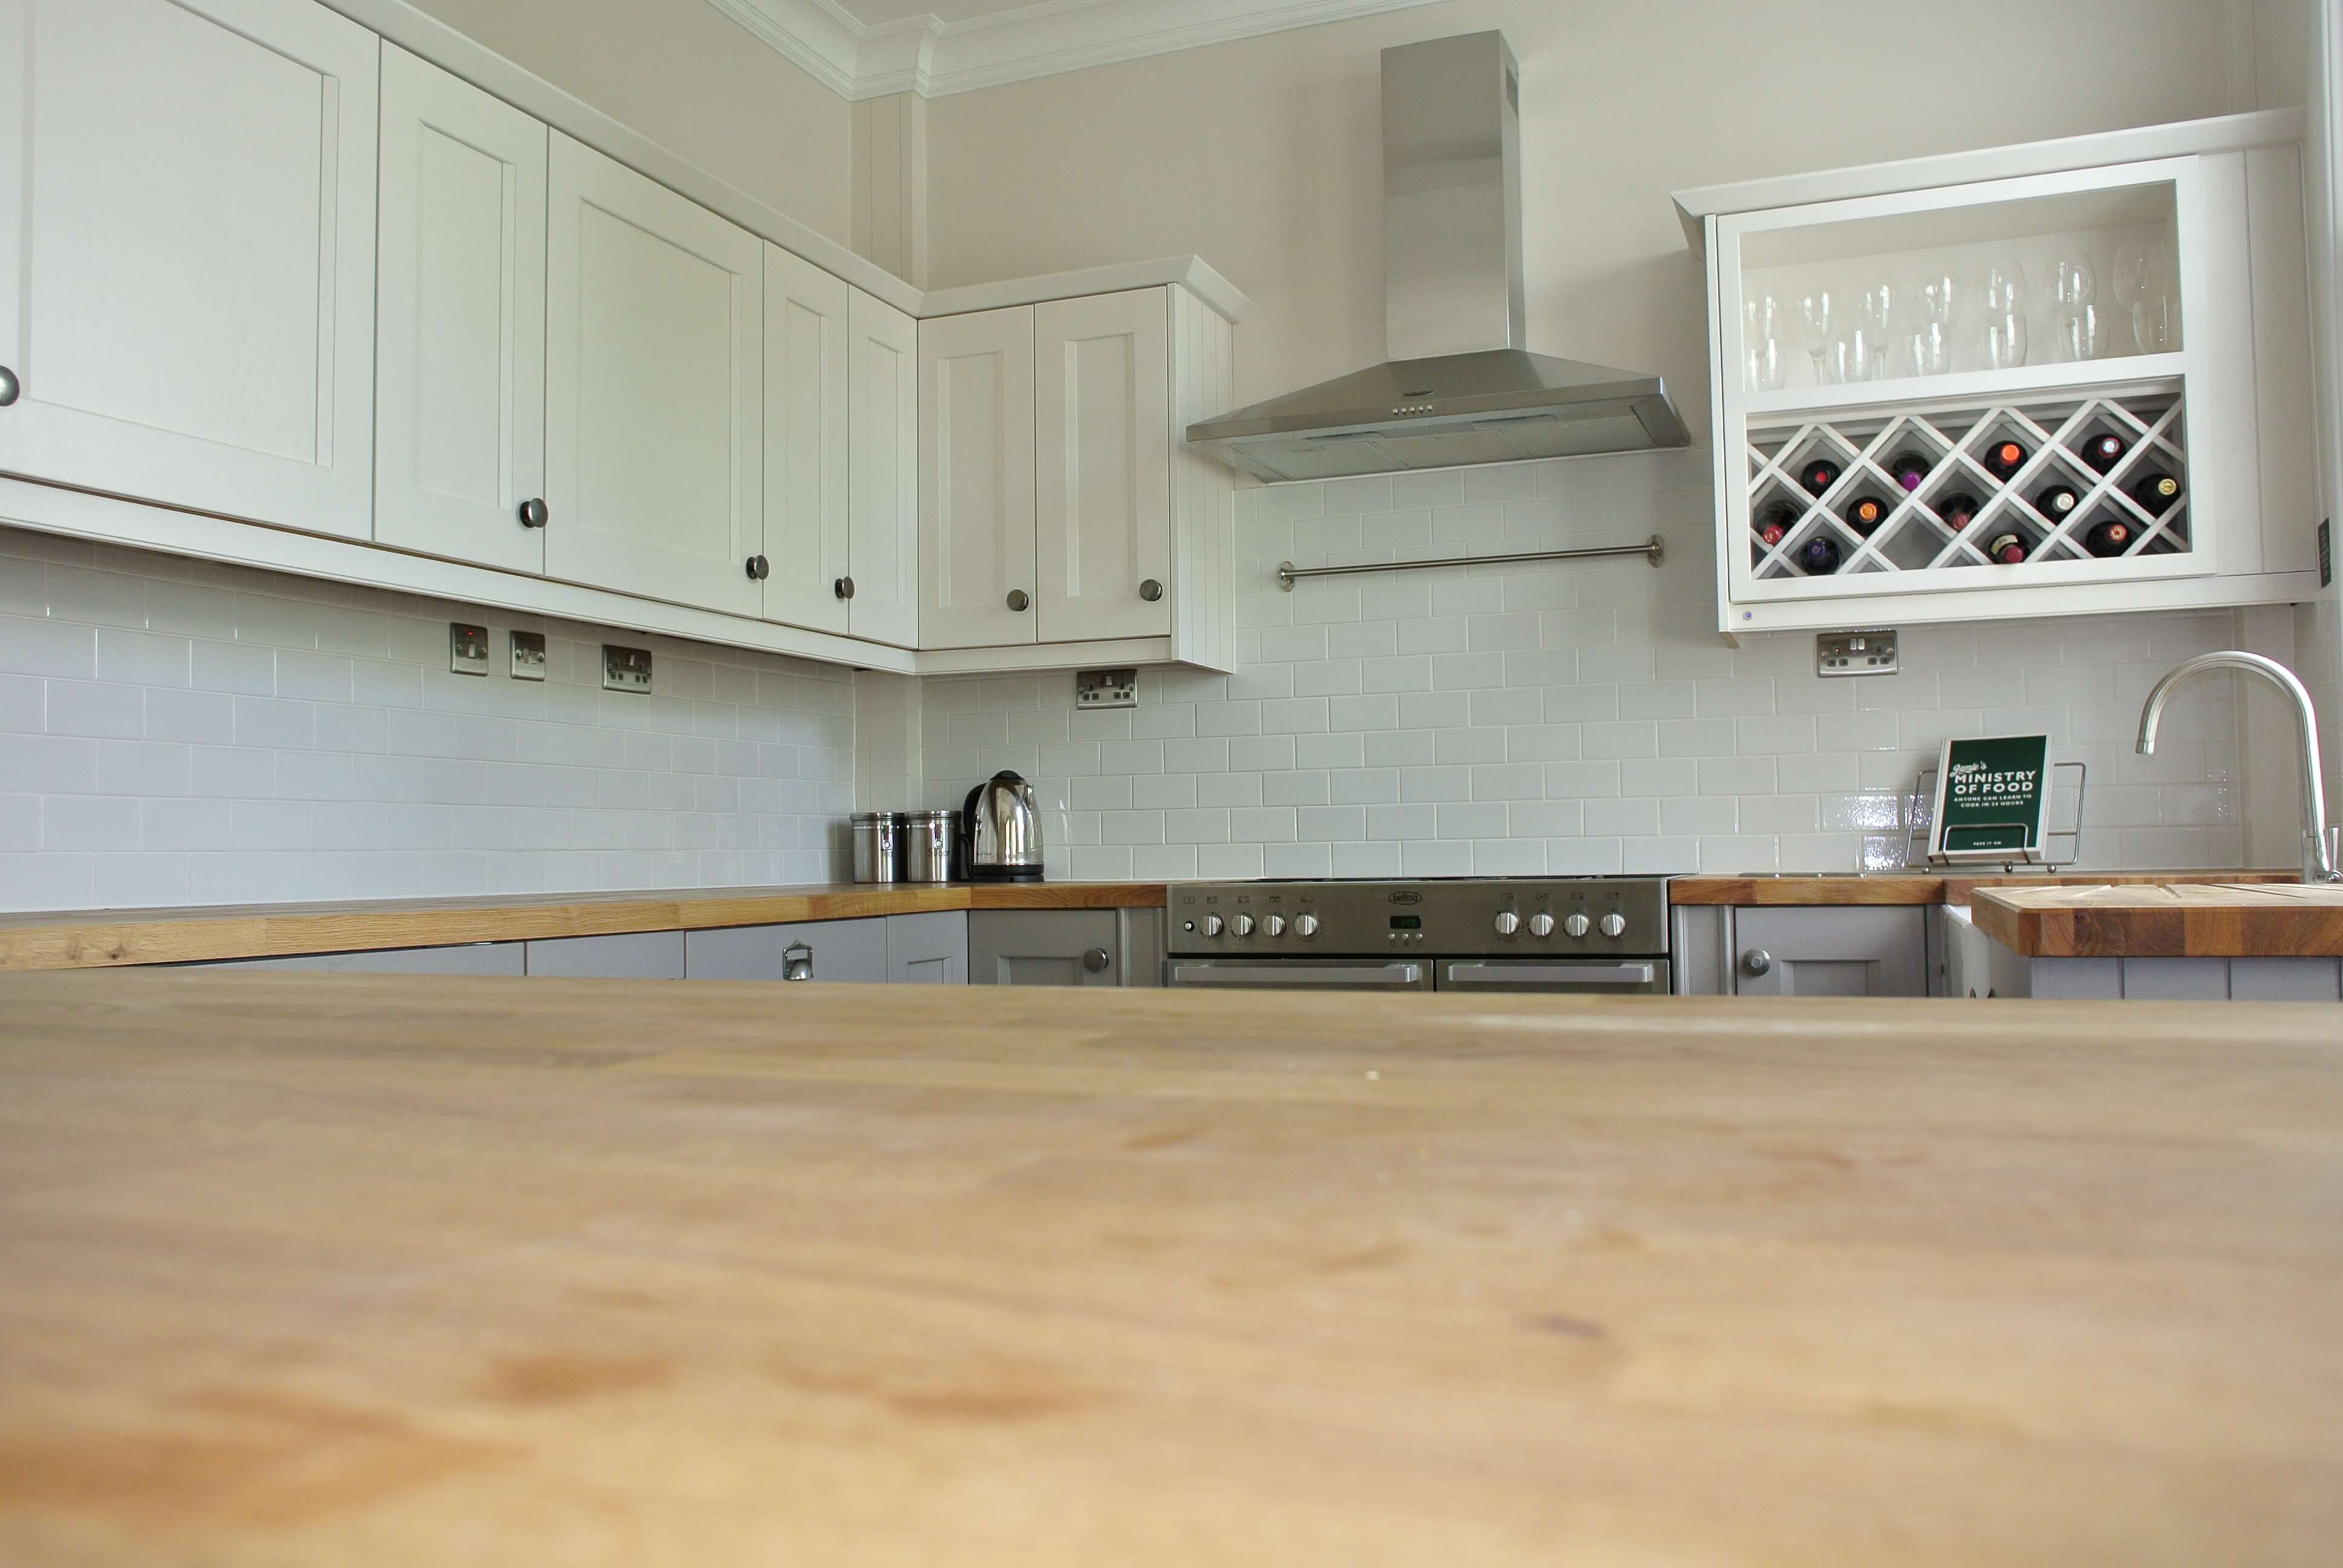 Bespoke Fitted Kitchen